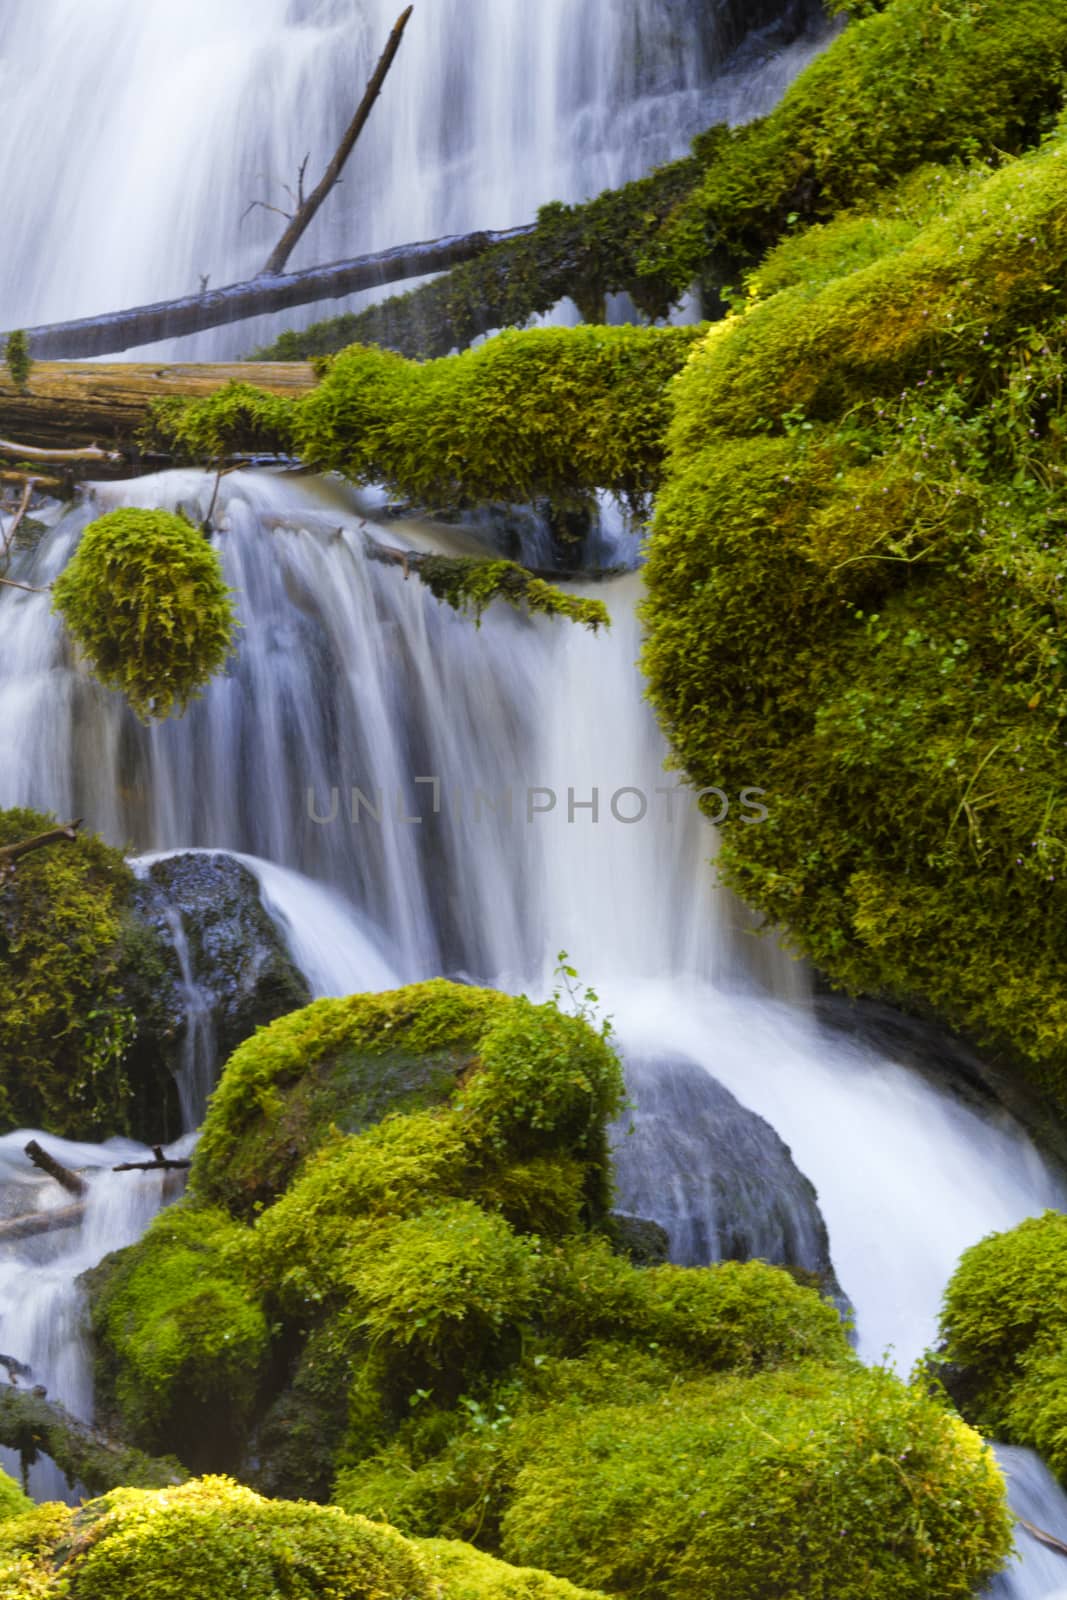 Natural, fallen log across the silky waterfall and mossy rocks of Clearwater Falls in Oregon on Umpqua Scenic Byway.  Short walk leads to lovely, secluded waterfall of tranquility and beauty.  